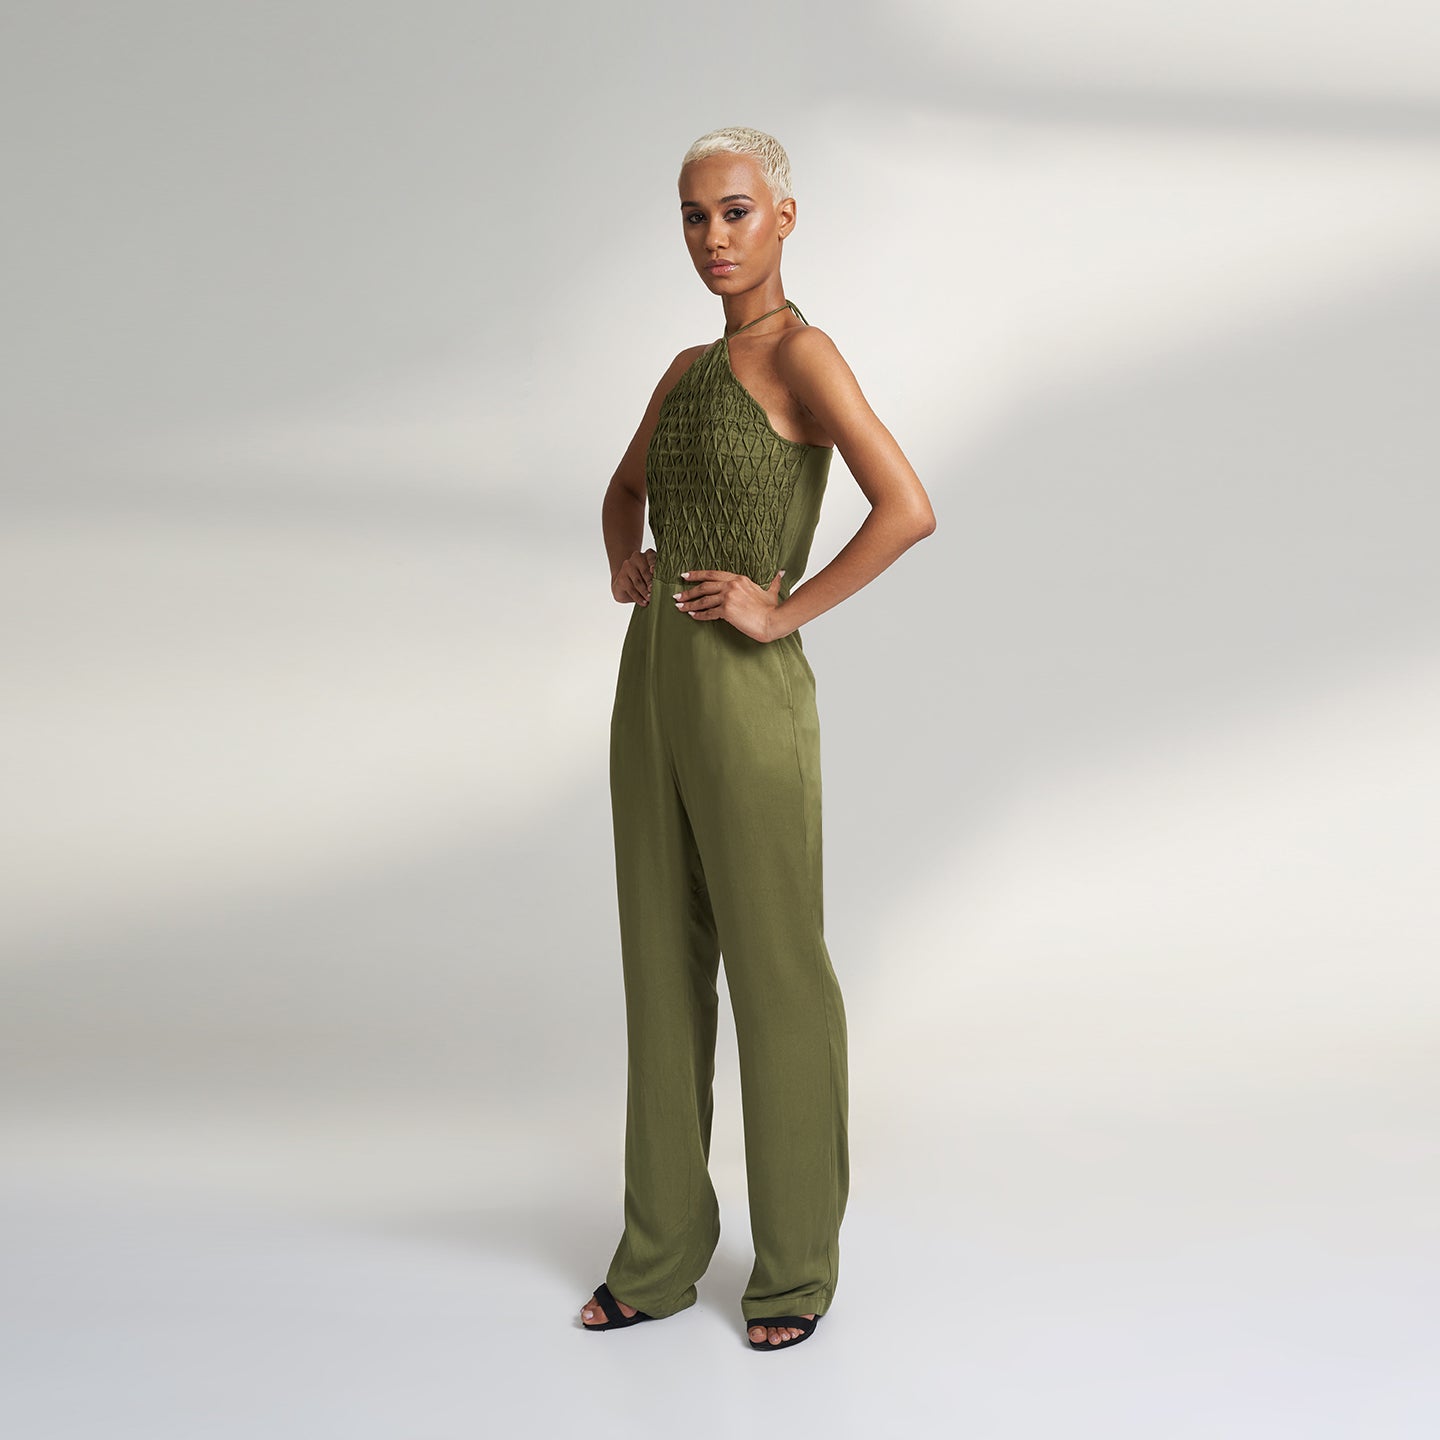 A global small size model wearing a solid olive green jumpsuit, highlighted with hand-stitched smocking on the bodice panel with a drawstring attached to the bodice to tie at the neck. inspired from the vintage window designs.